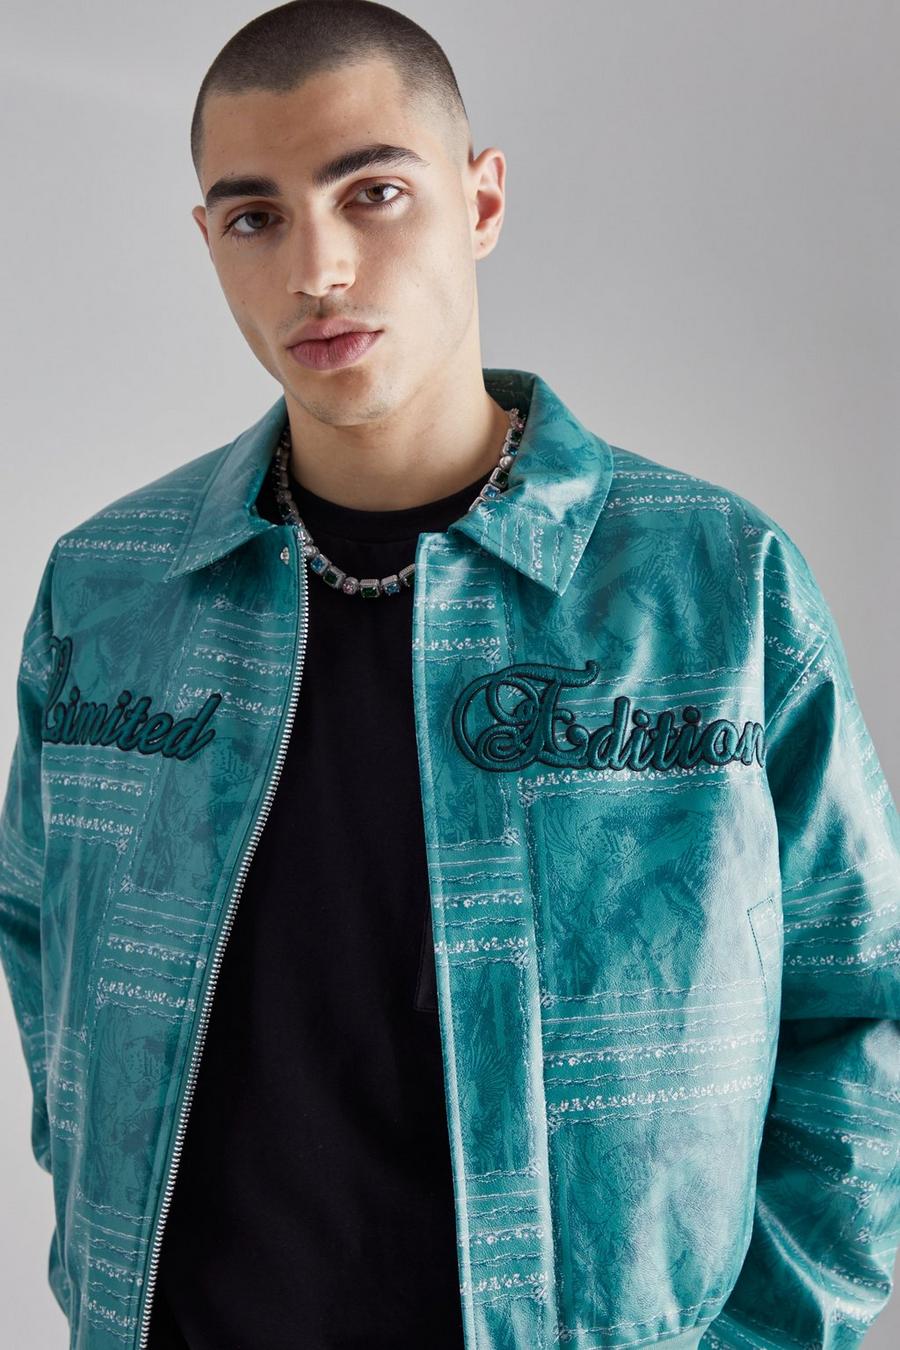 Green Limited Edition Boxy Printed Bomber